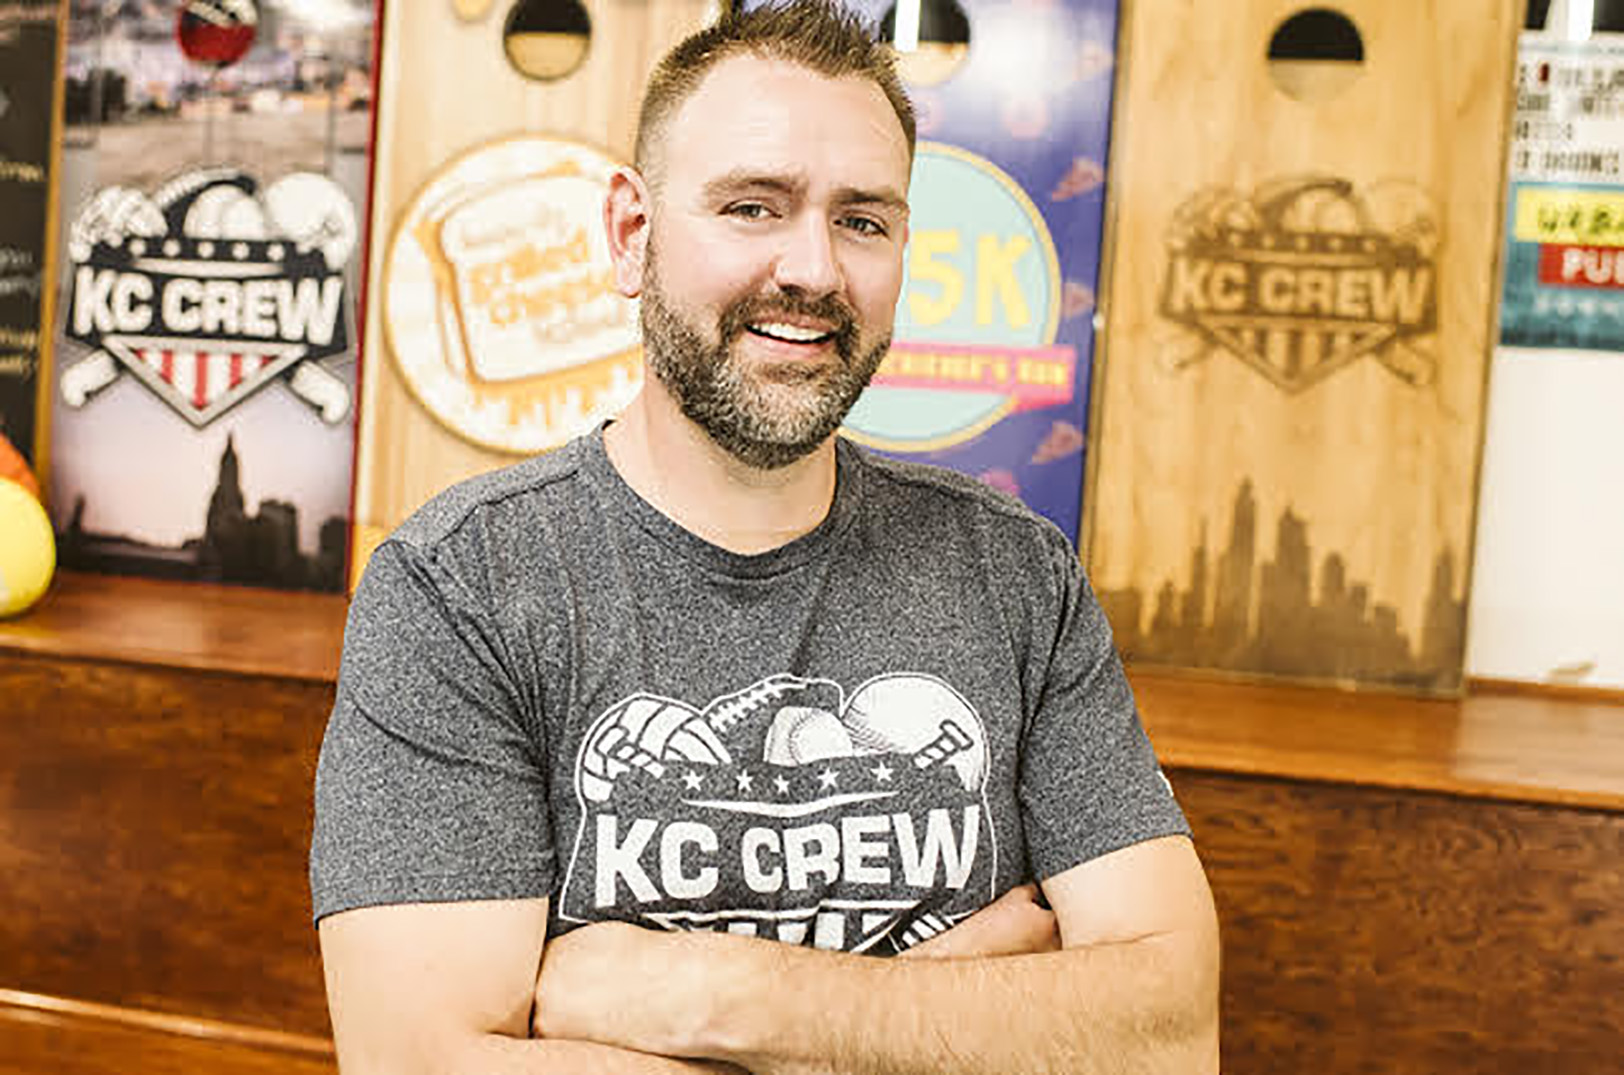 KC Crew founder set to open ‘first-of-many’ game-centered bar, restaurant in STL metro